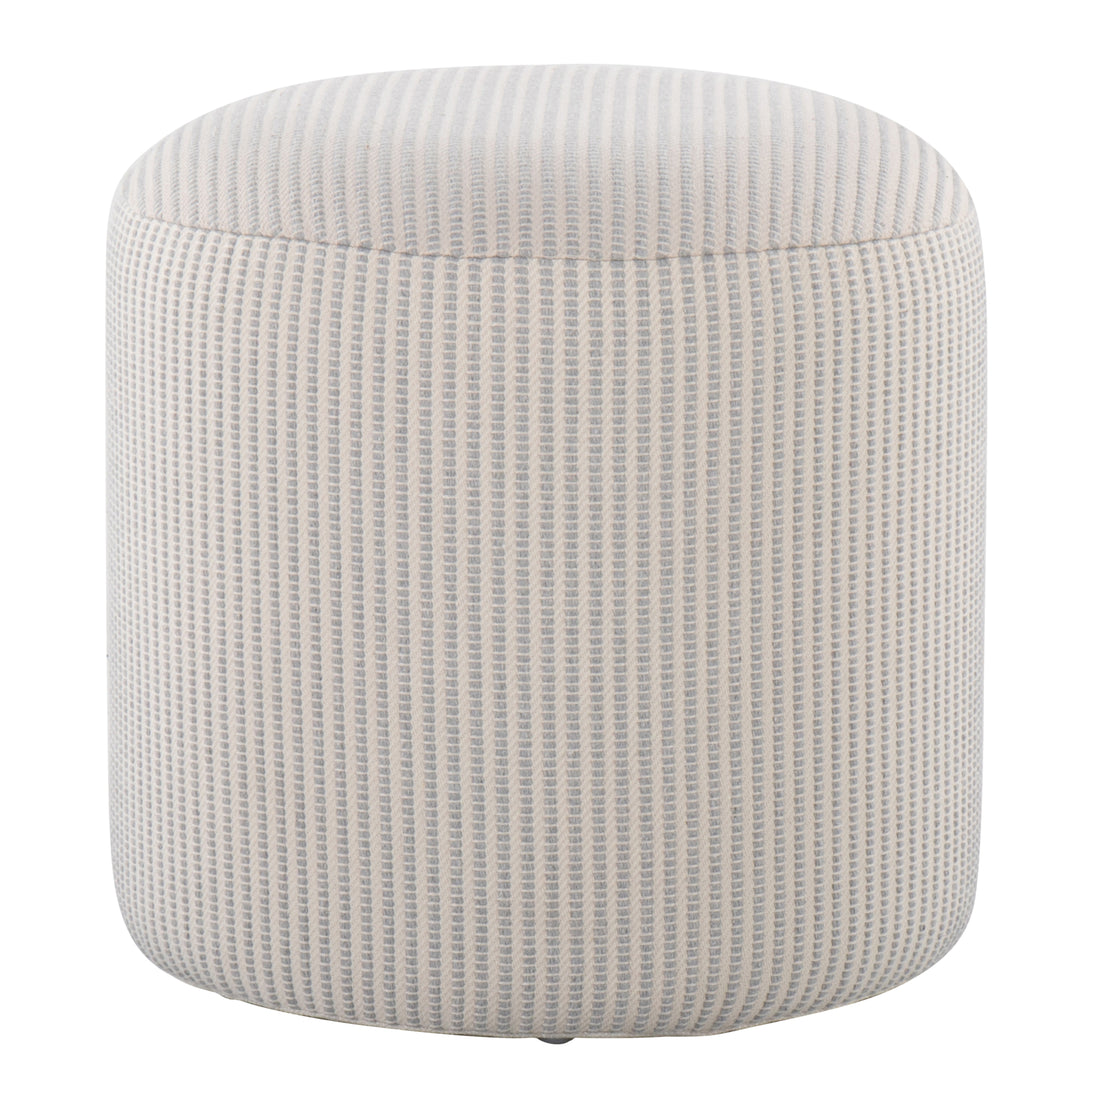 Round Pouf in Knitted Grey and White Fabric by